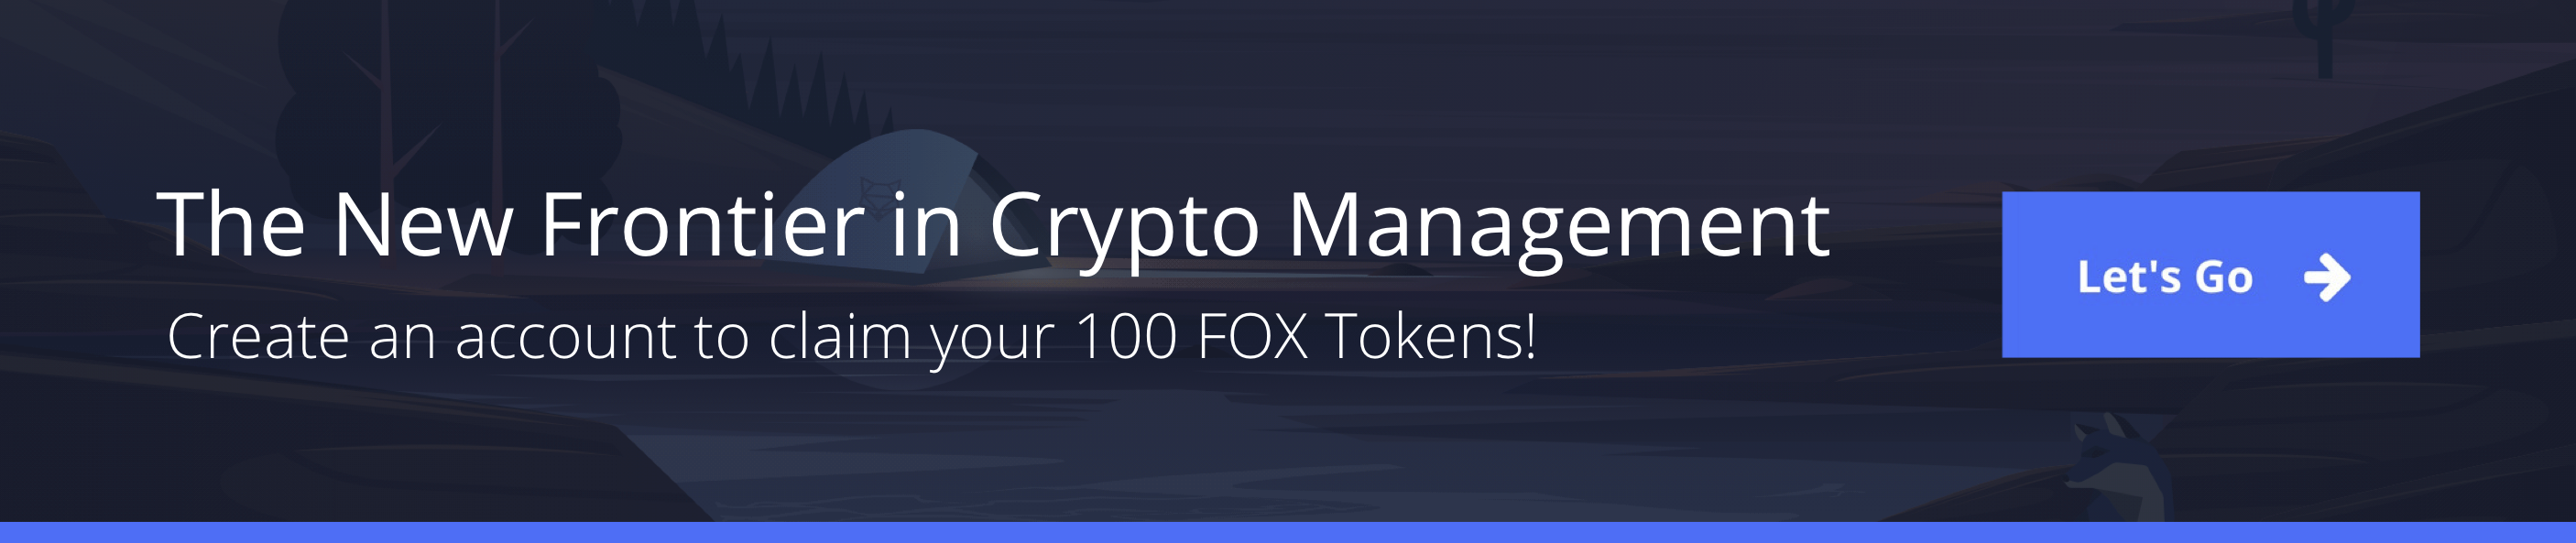 Create a verified ShapeShift account to claim your 100 FOX tokens. Experience the new frontier in crypto management.